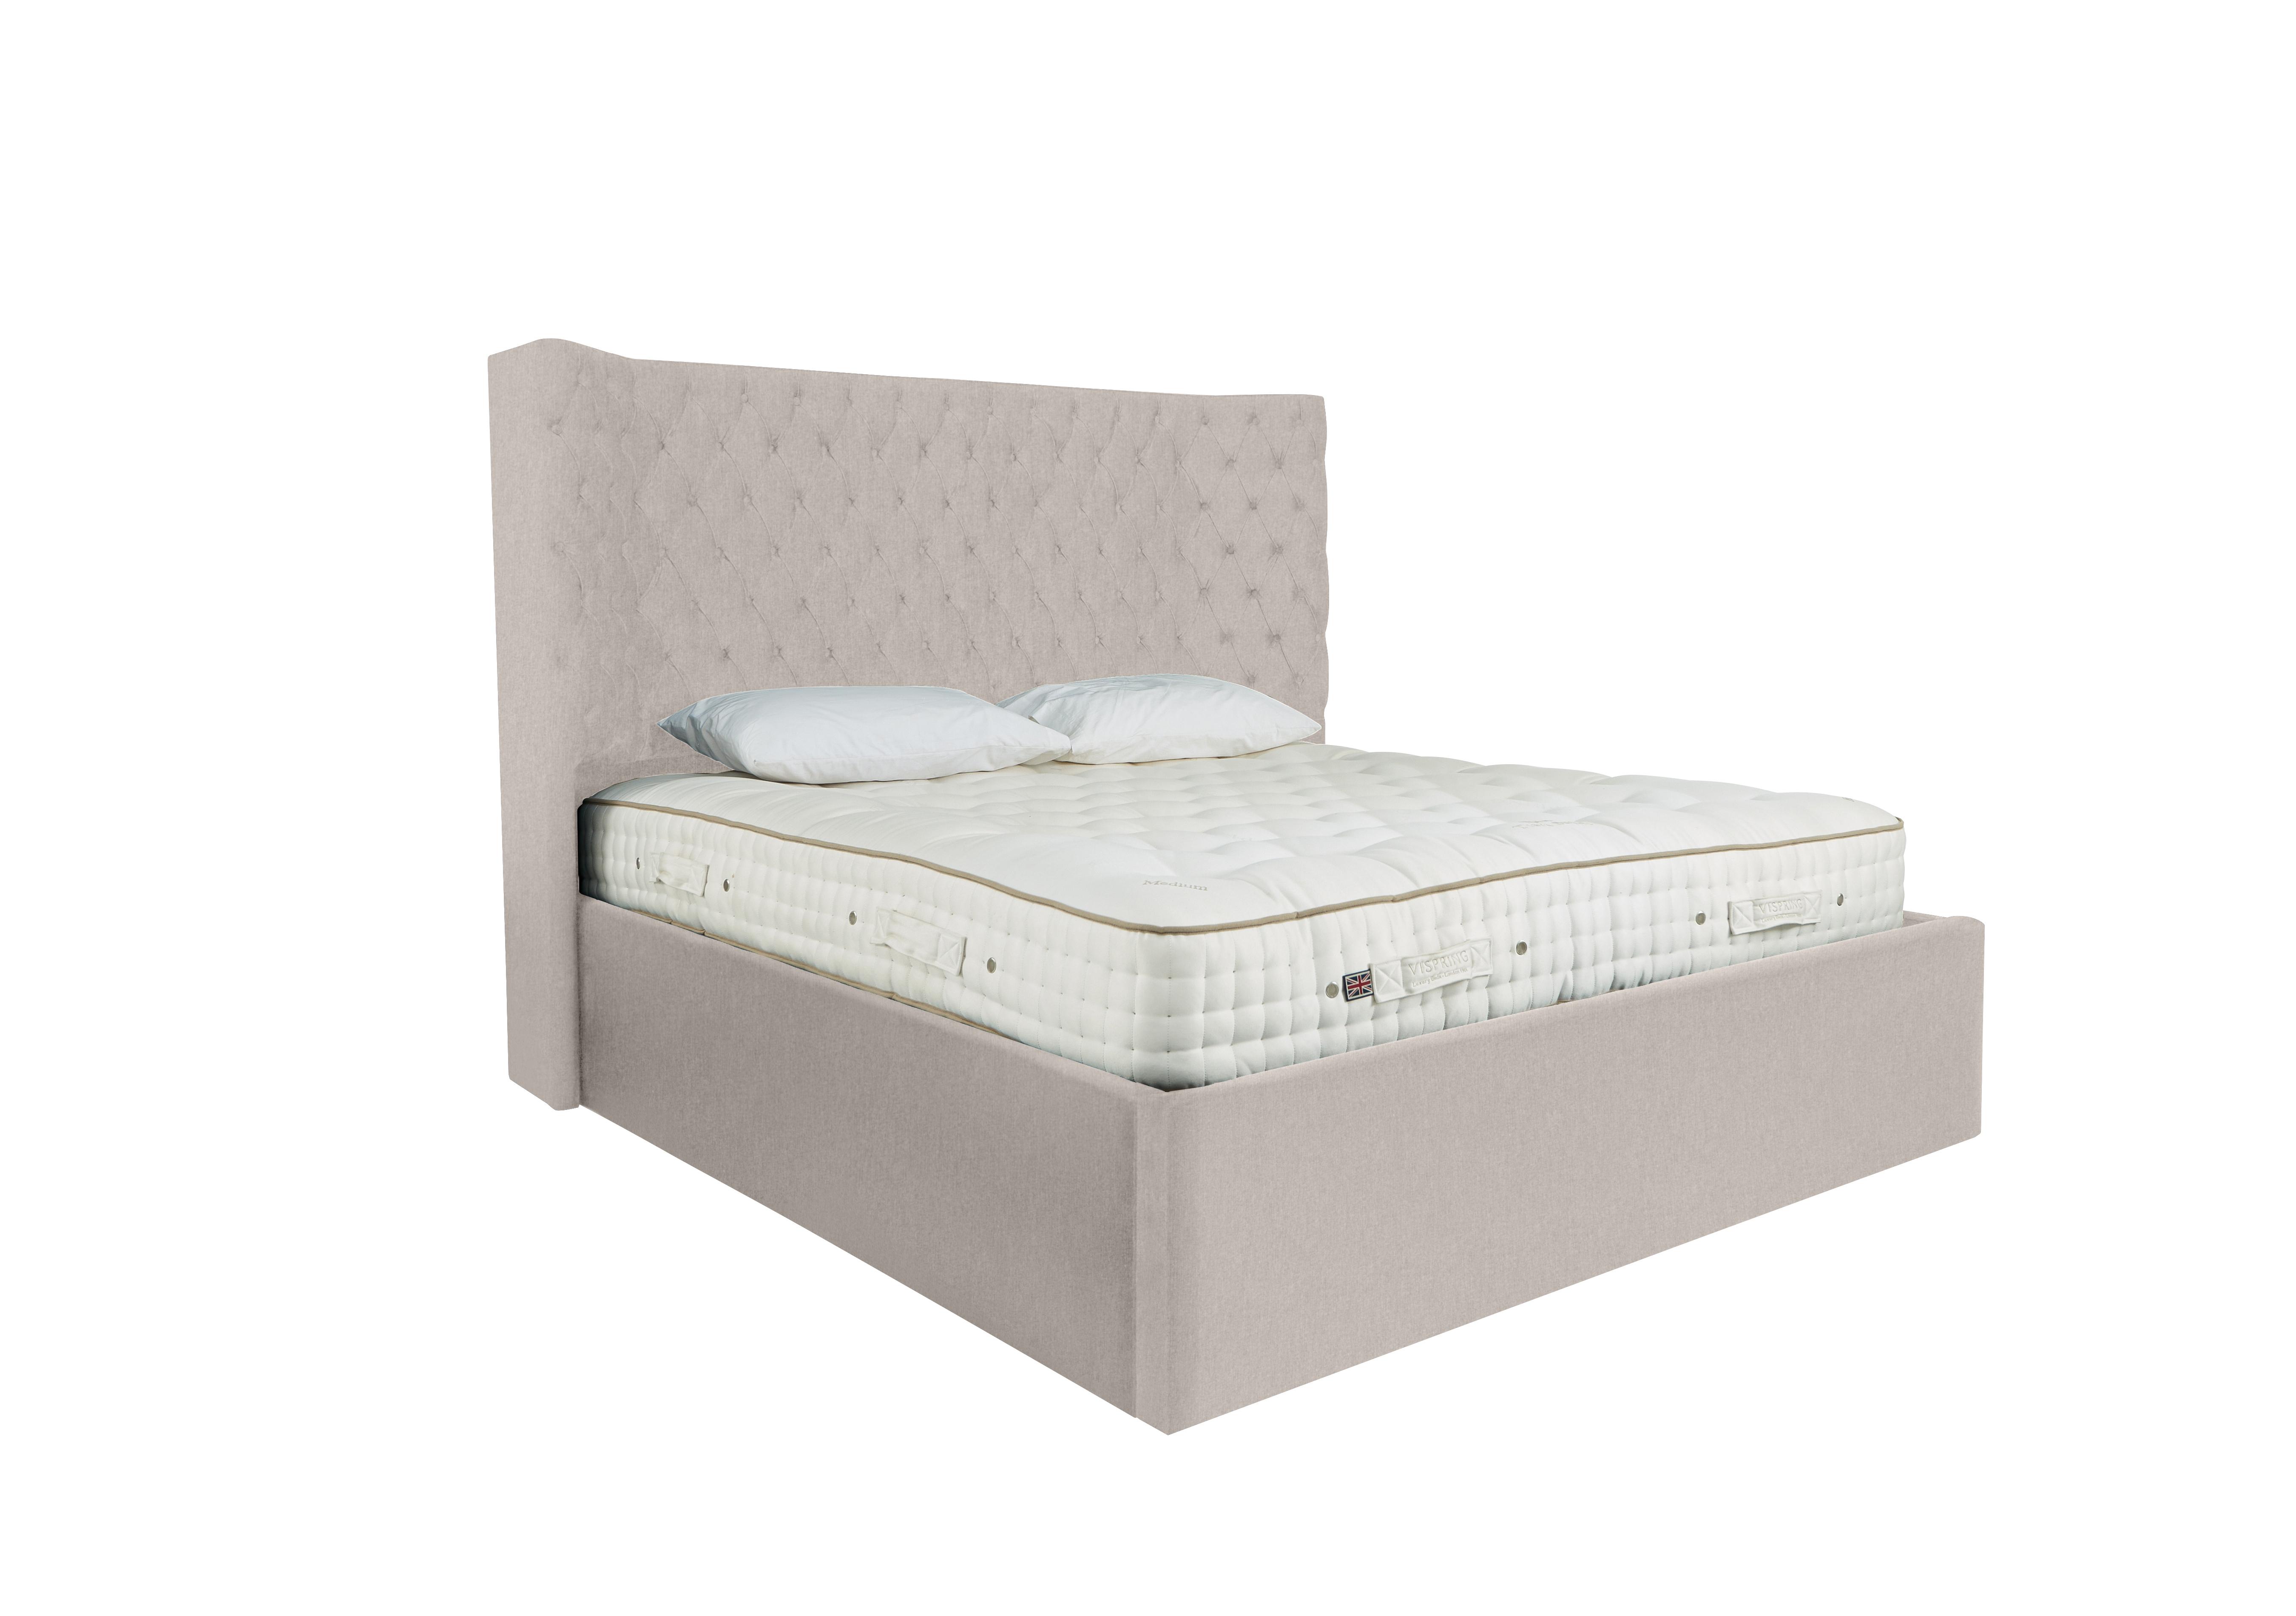 Maximus Ottoman Bed Frame in Linnet Clay on Furniture Village